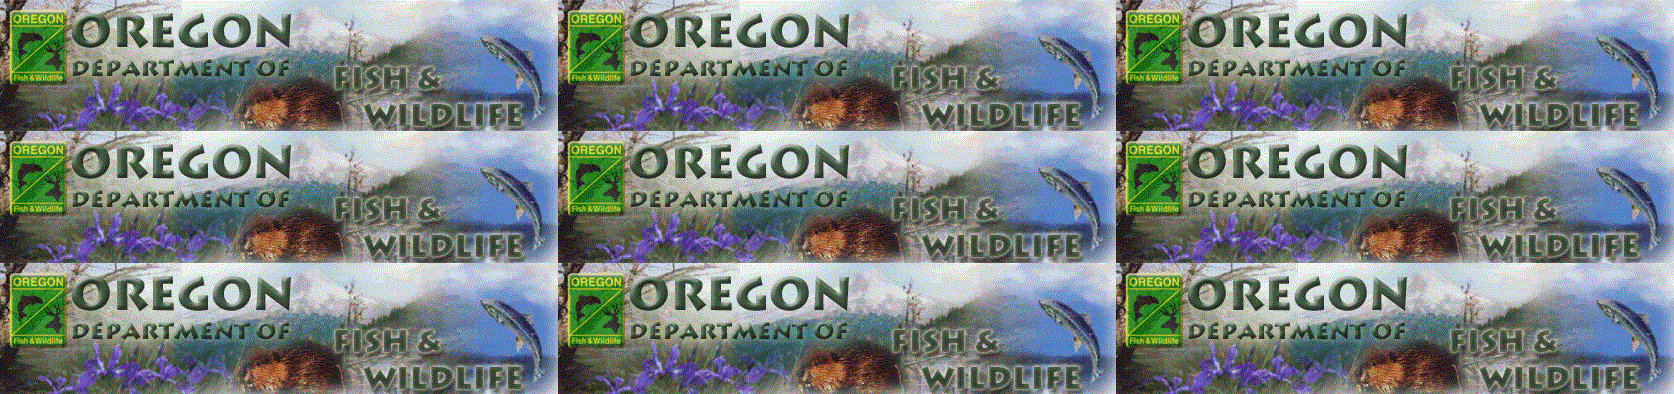 Tiled image of Oregon Department of Fish and Wildlife logo